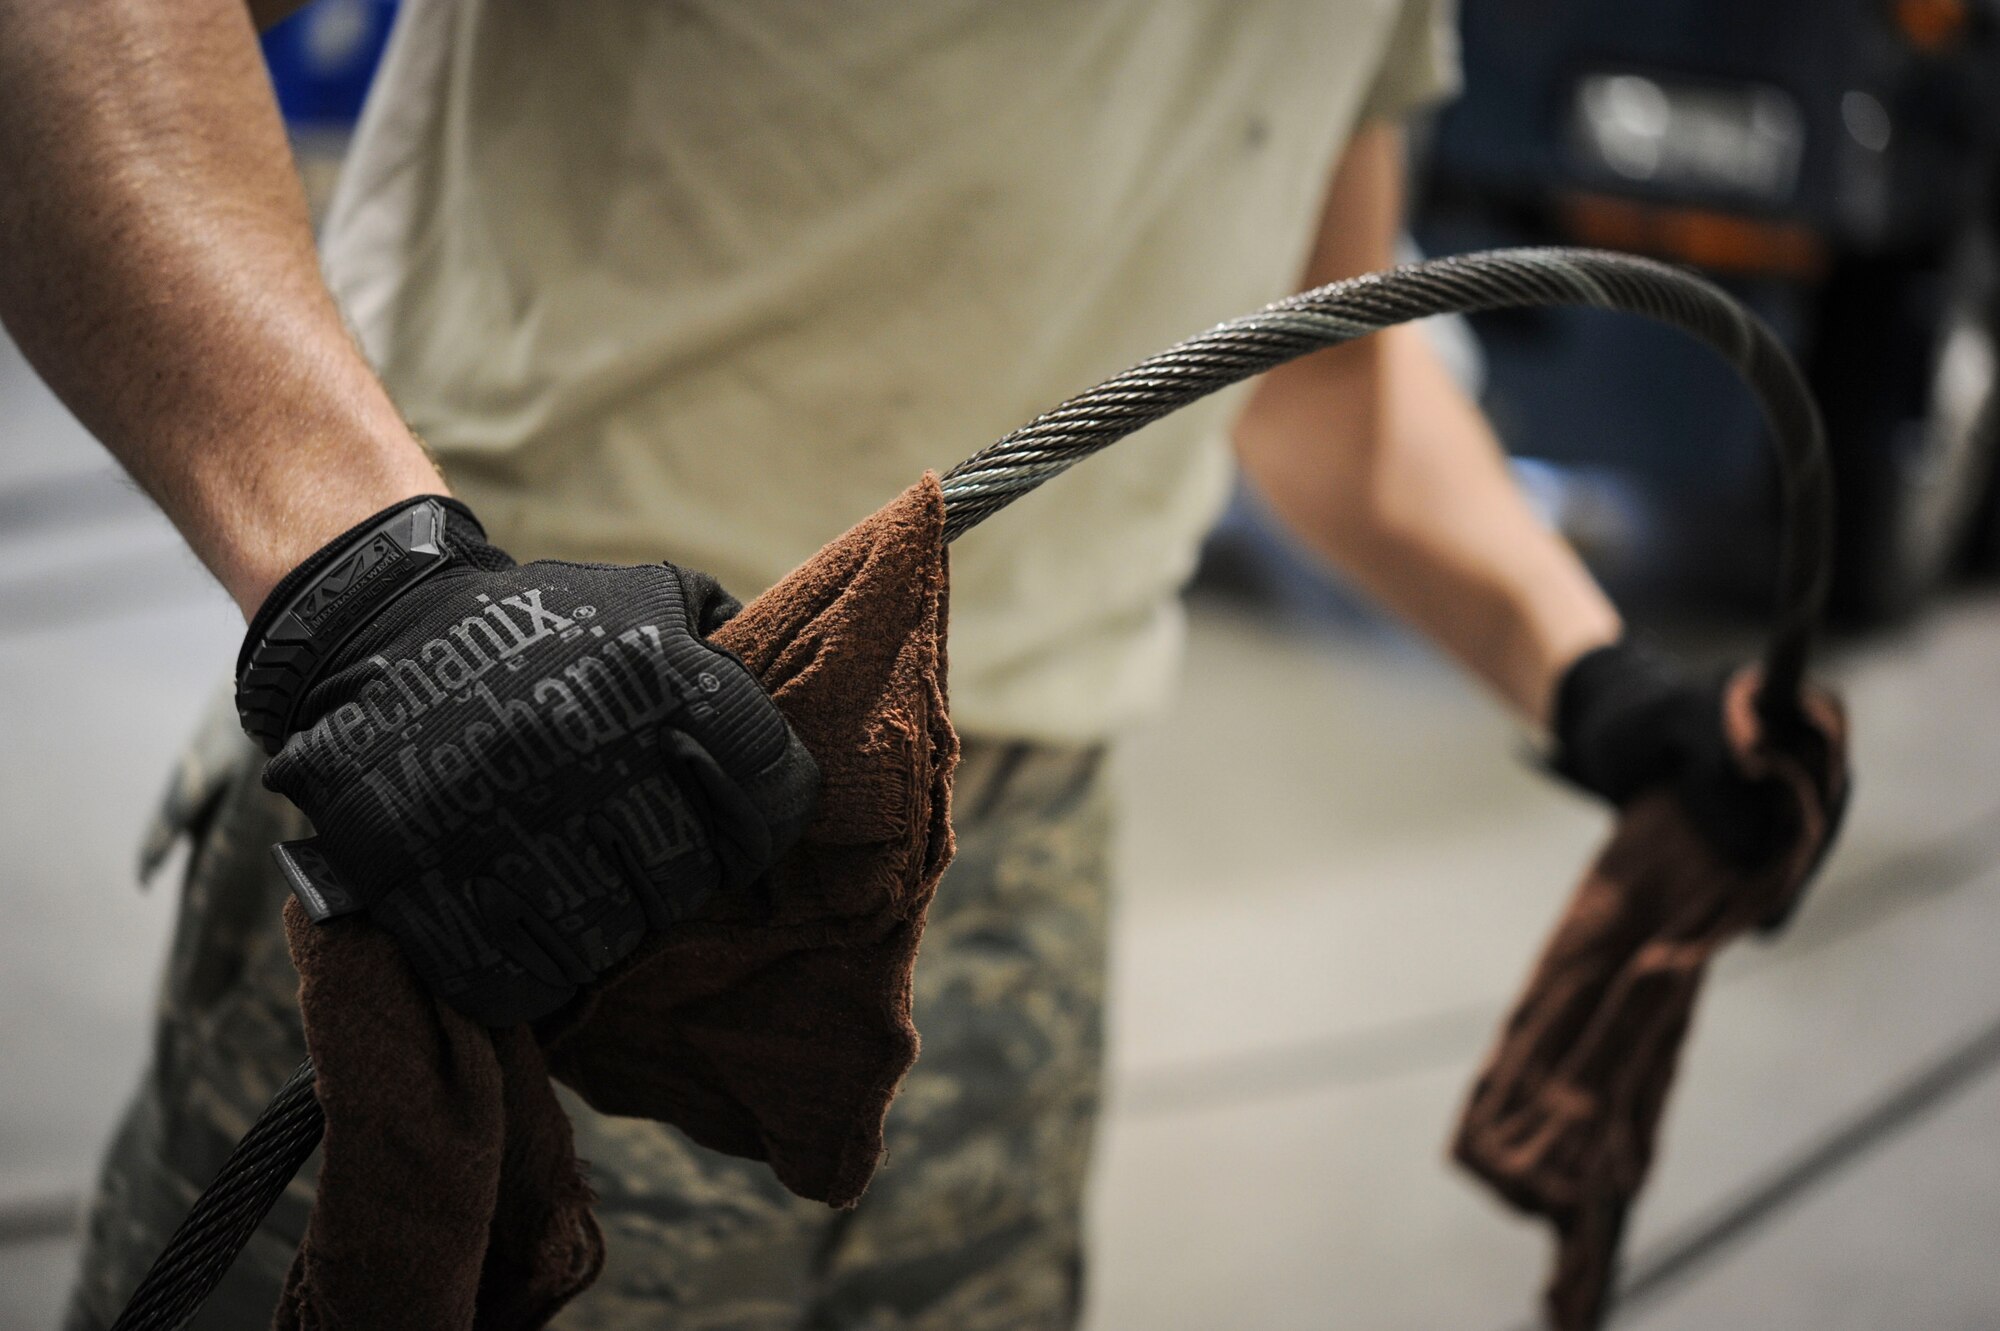 Airman 1st Class Robert Cook, 91st Missile Operations Squadron mechanical and pneudraulics section technician, checks a new cable for deficiencies during maintenance on a crane on Minot Air Force Base, N.D. Oct. 30, 2014. While performing checks Cook is constantly utilizing a two-person concept to ensure nothing is overlooked. (U.S. Air Force photo/Senior Airman Stephanie Morris)